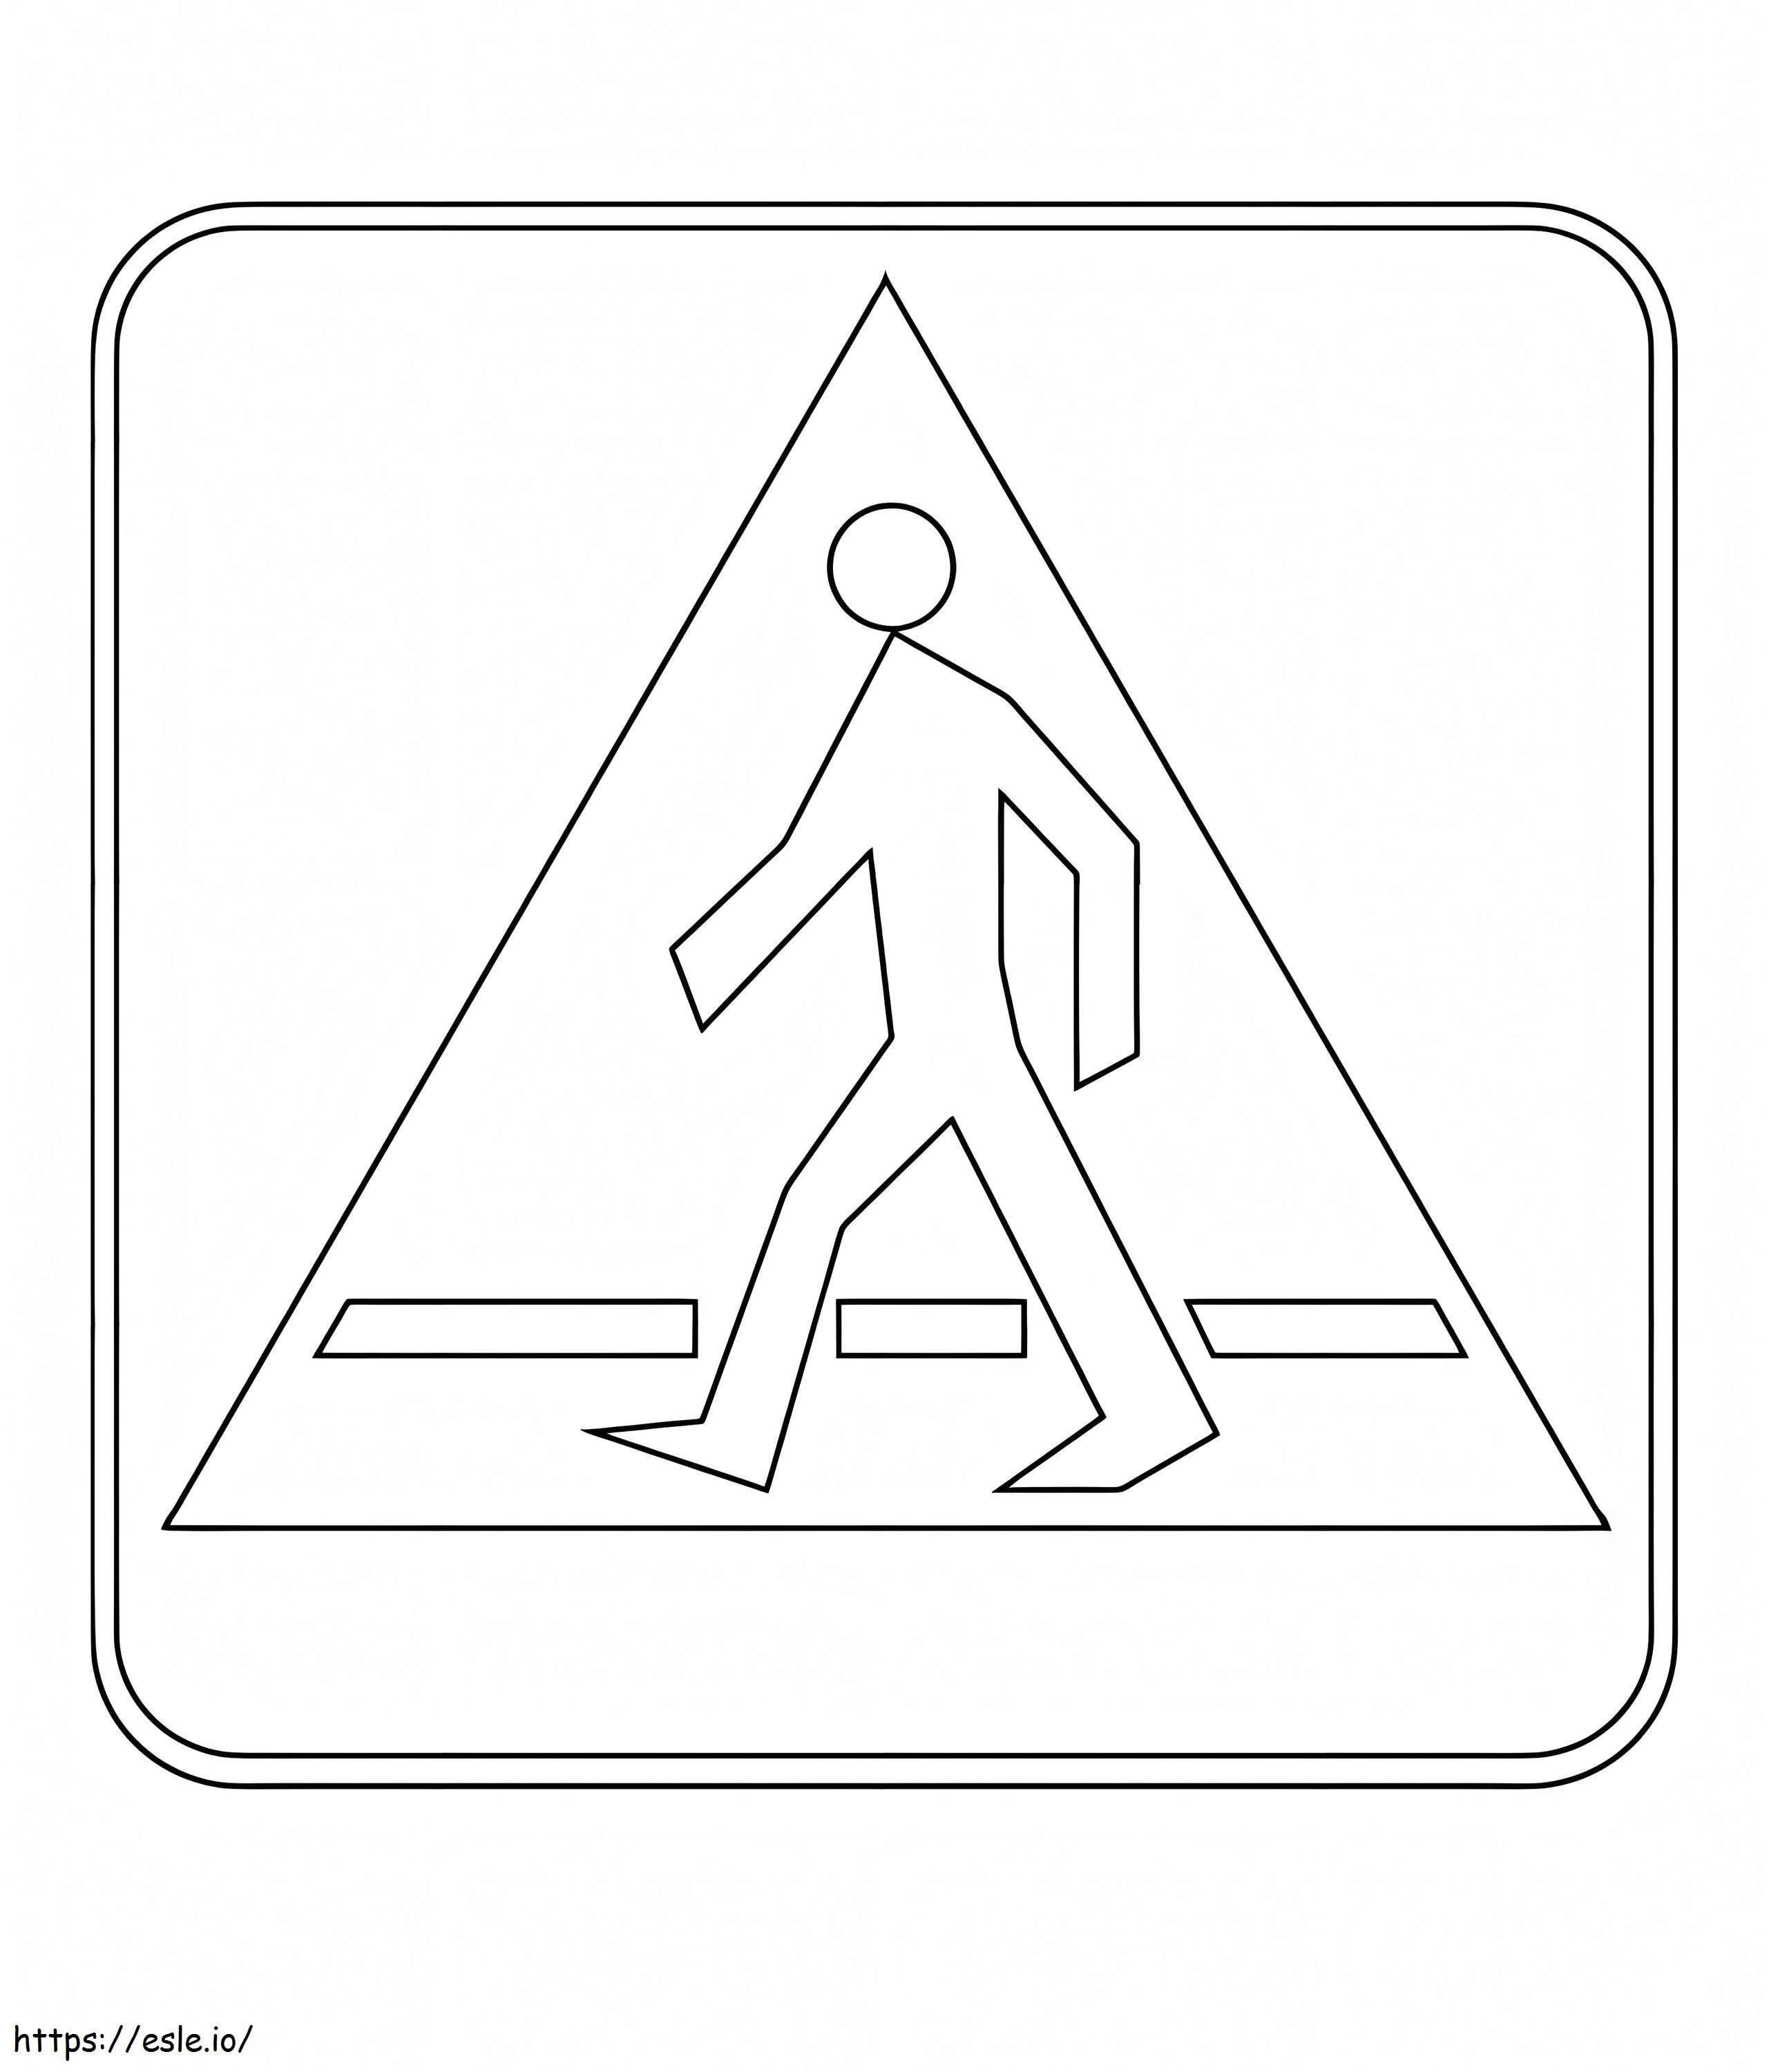 Pedestrian Crossing Sign coloring page